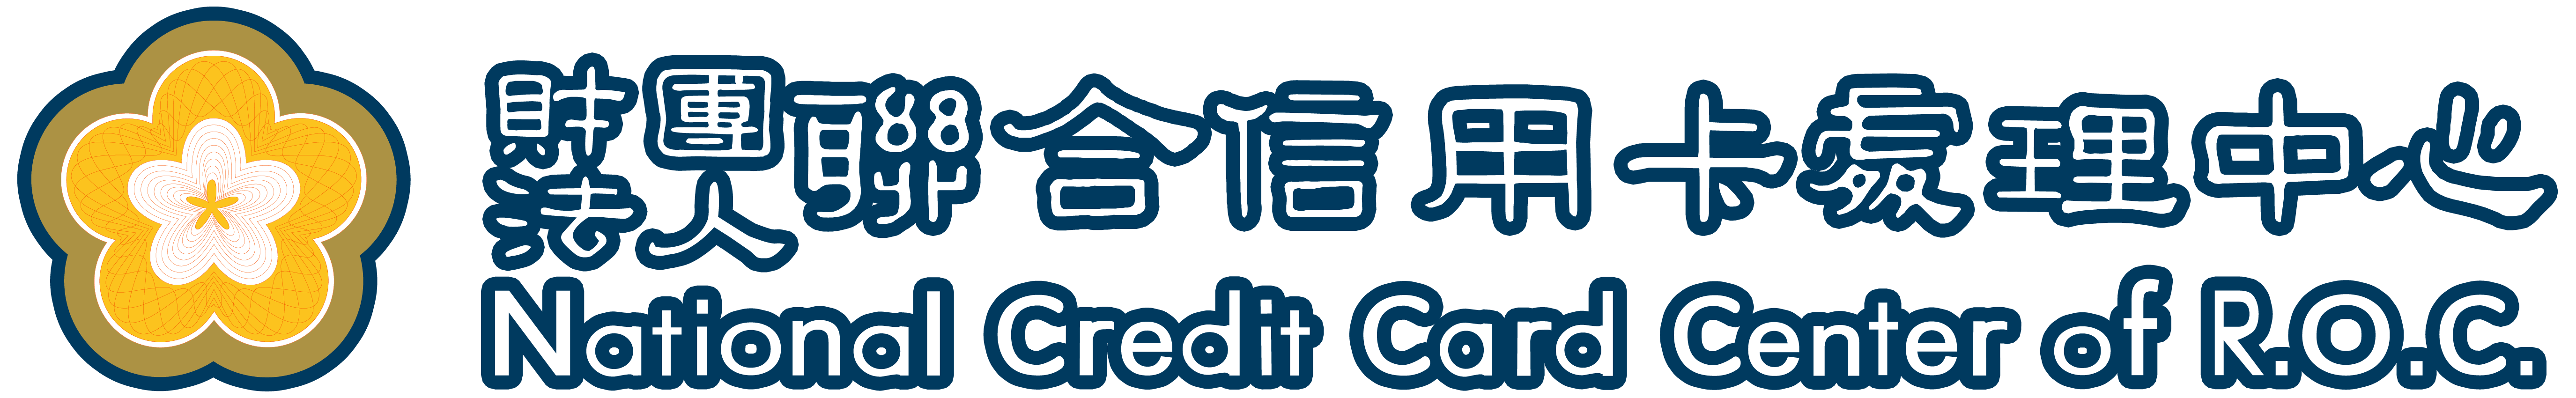 National Credit Card Center of R.O.C:Back Home Page